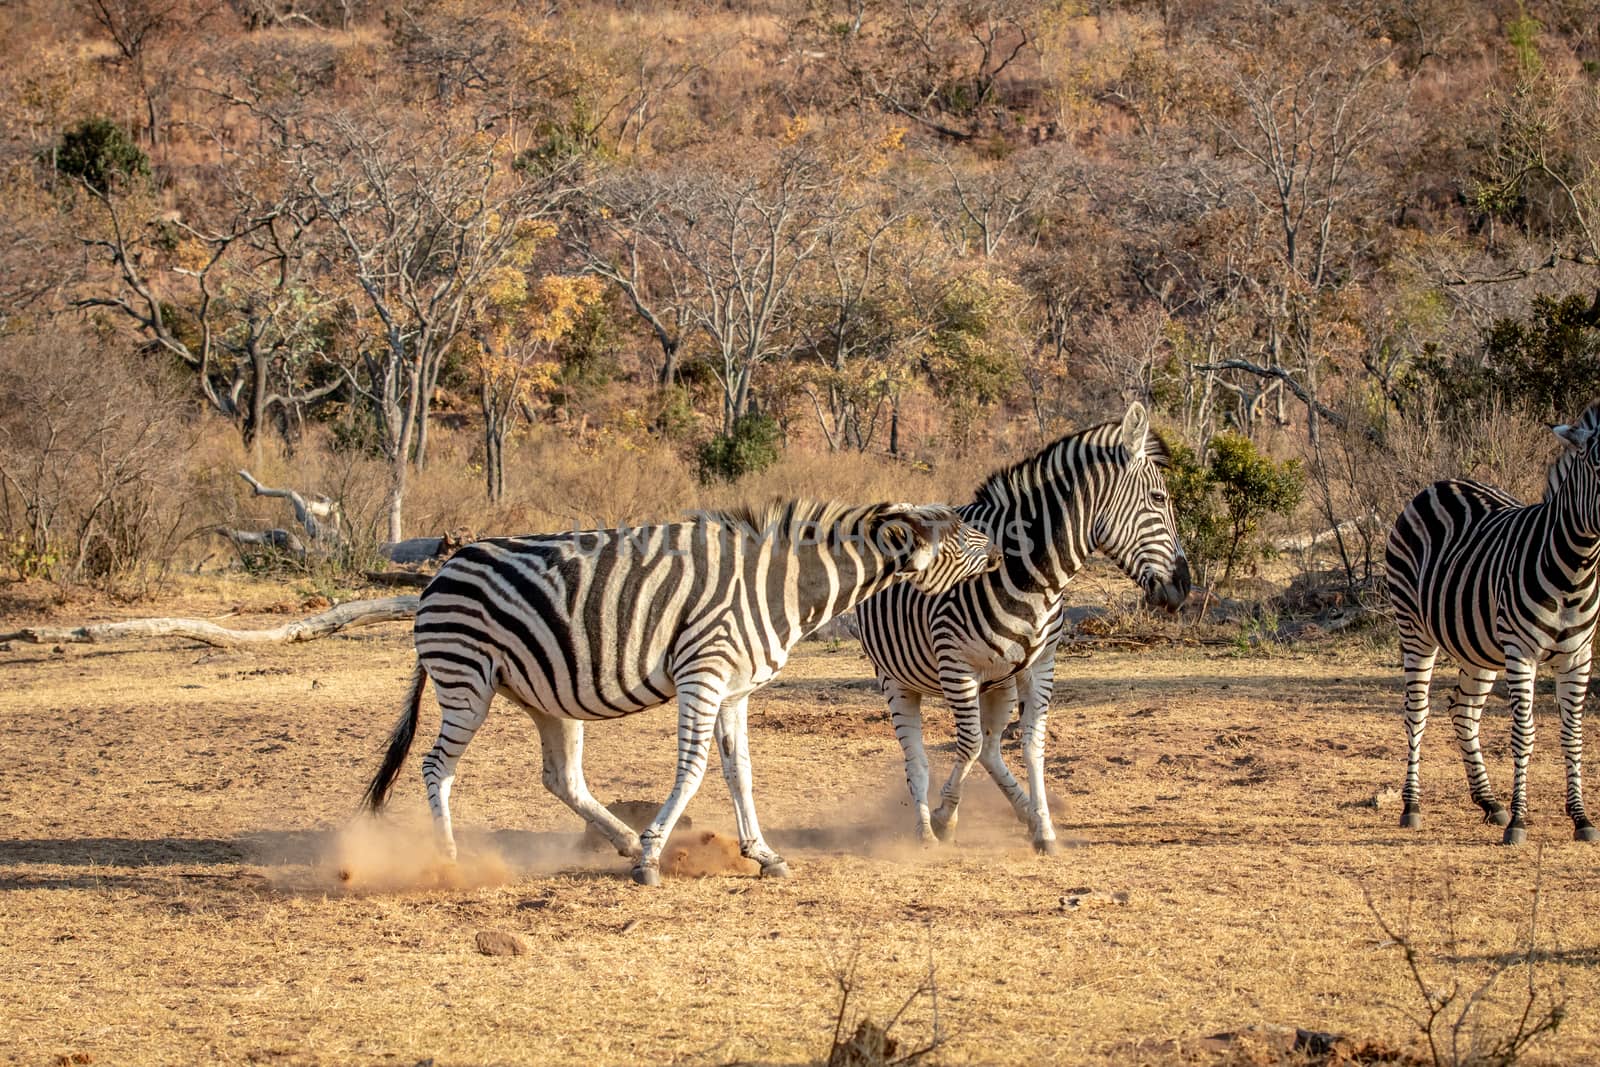 Two Zebras fighting on a plain. by Simoneemanphotography